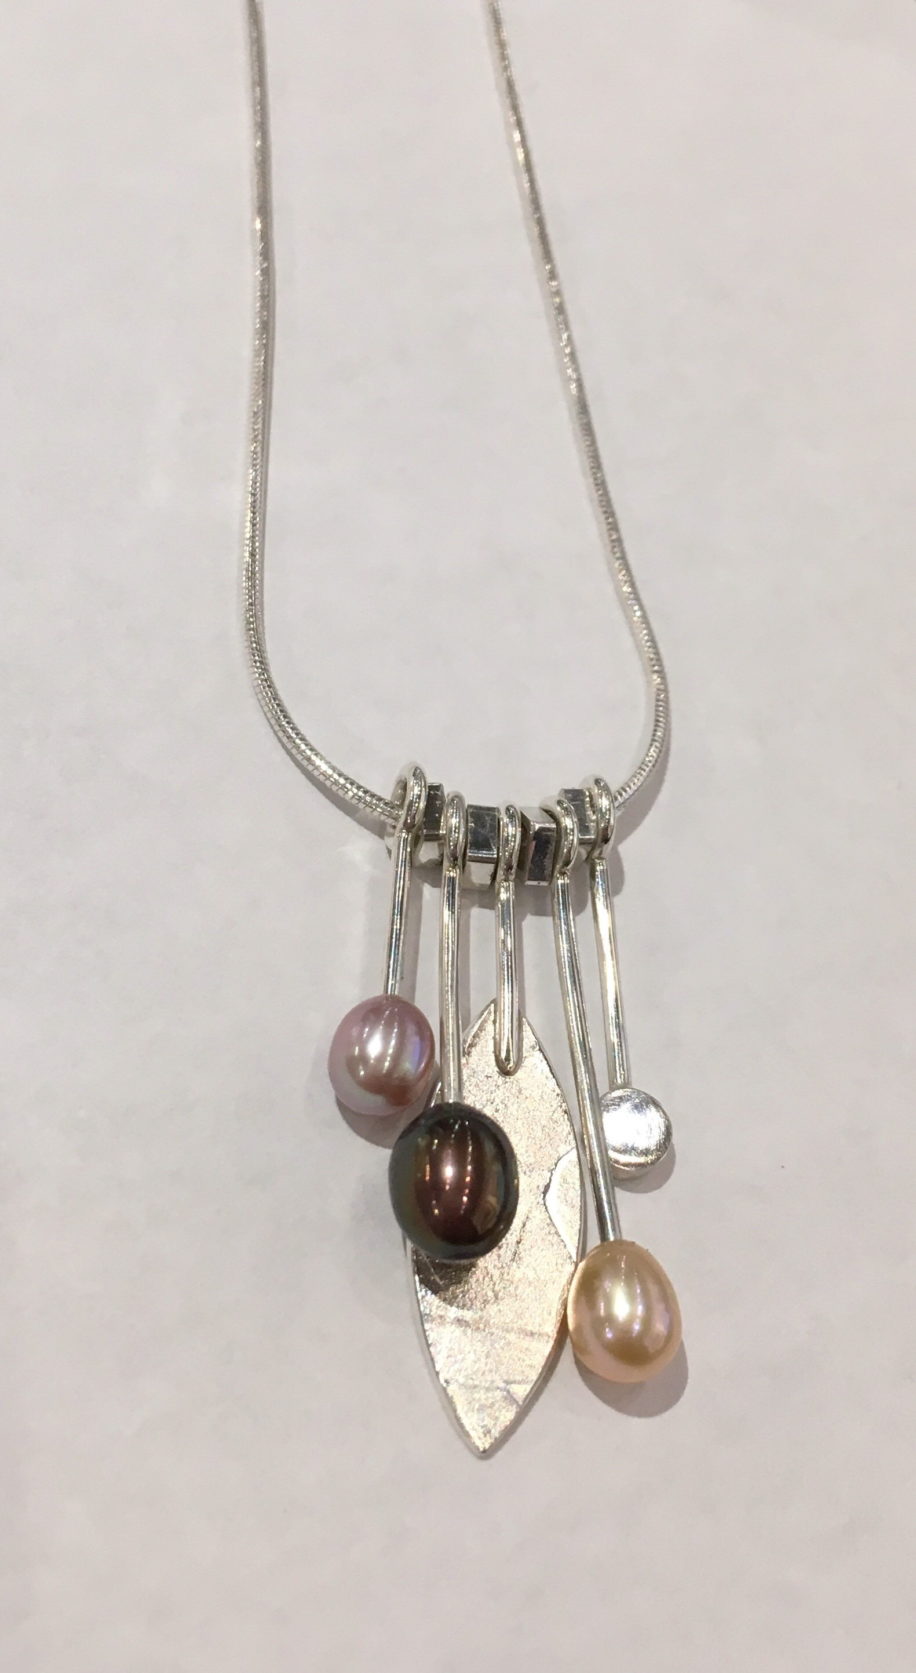 Freshwater Pearls Dangly Necklace by Brenda Roy at The Avenue Gallery, a contemporary fine art gallery in Victoria, BC, Canada.